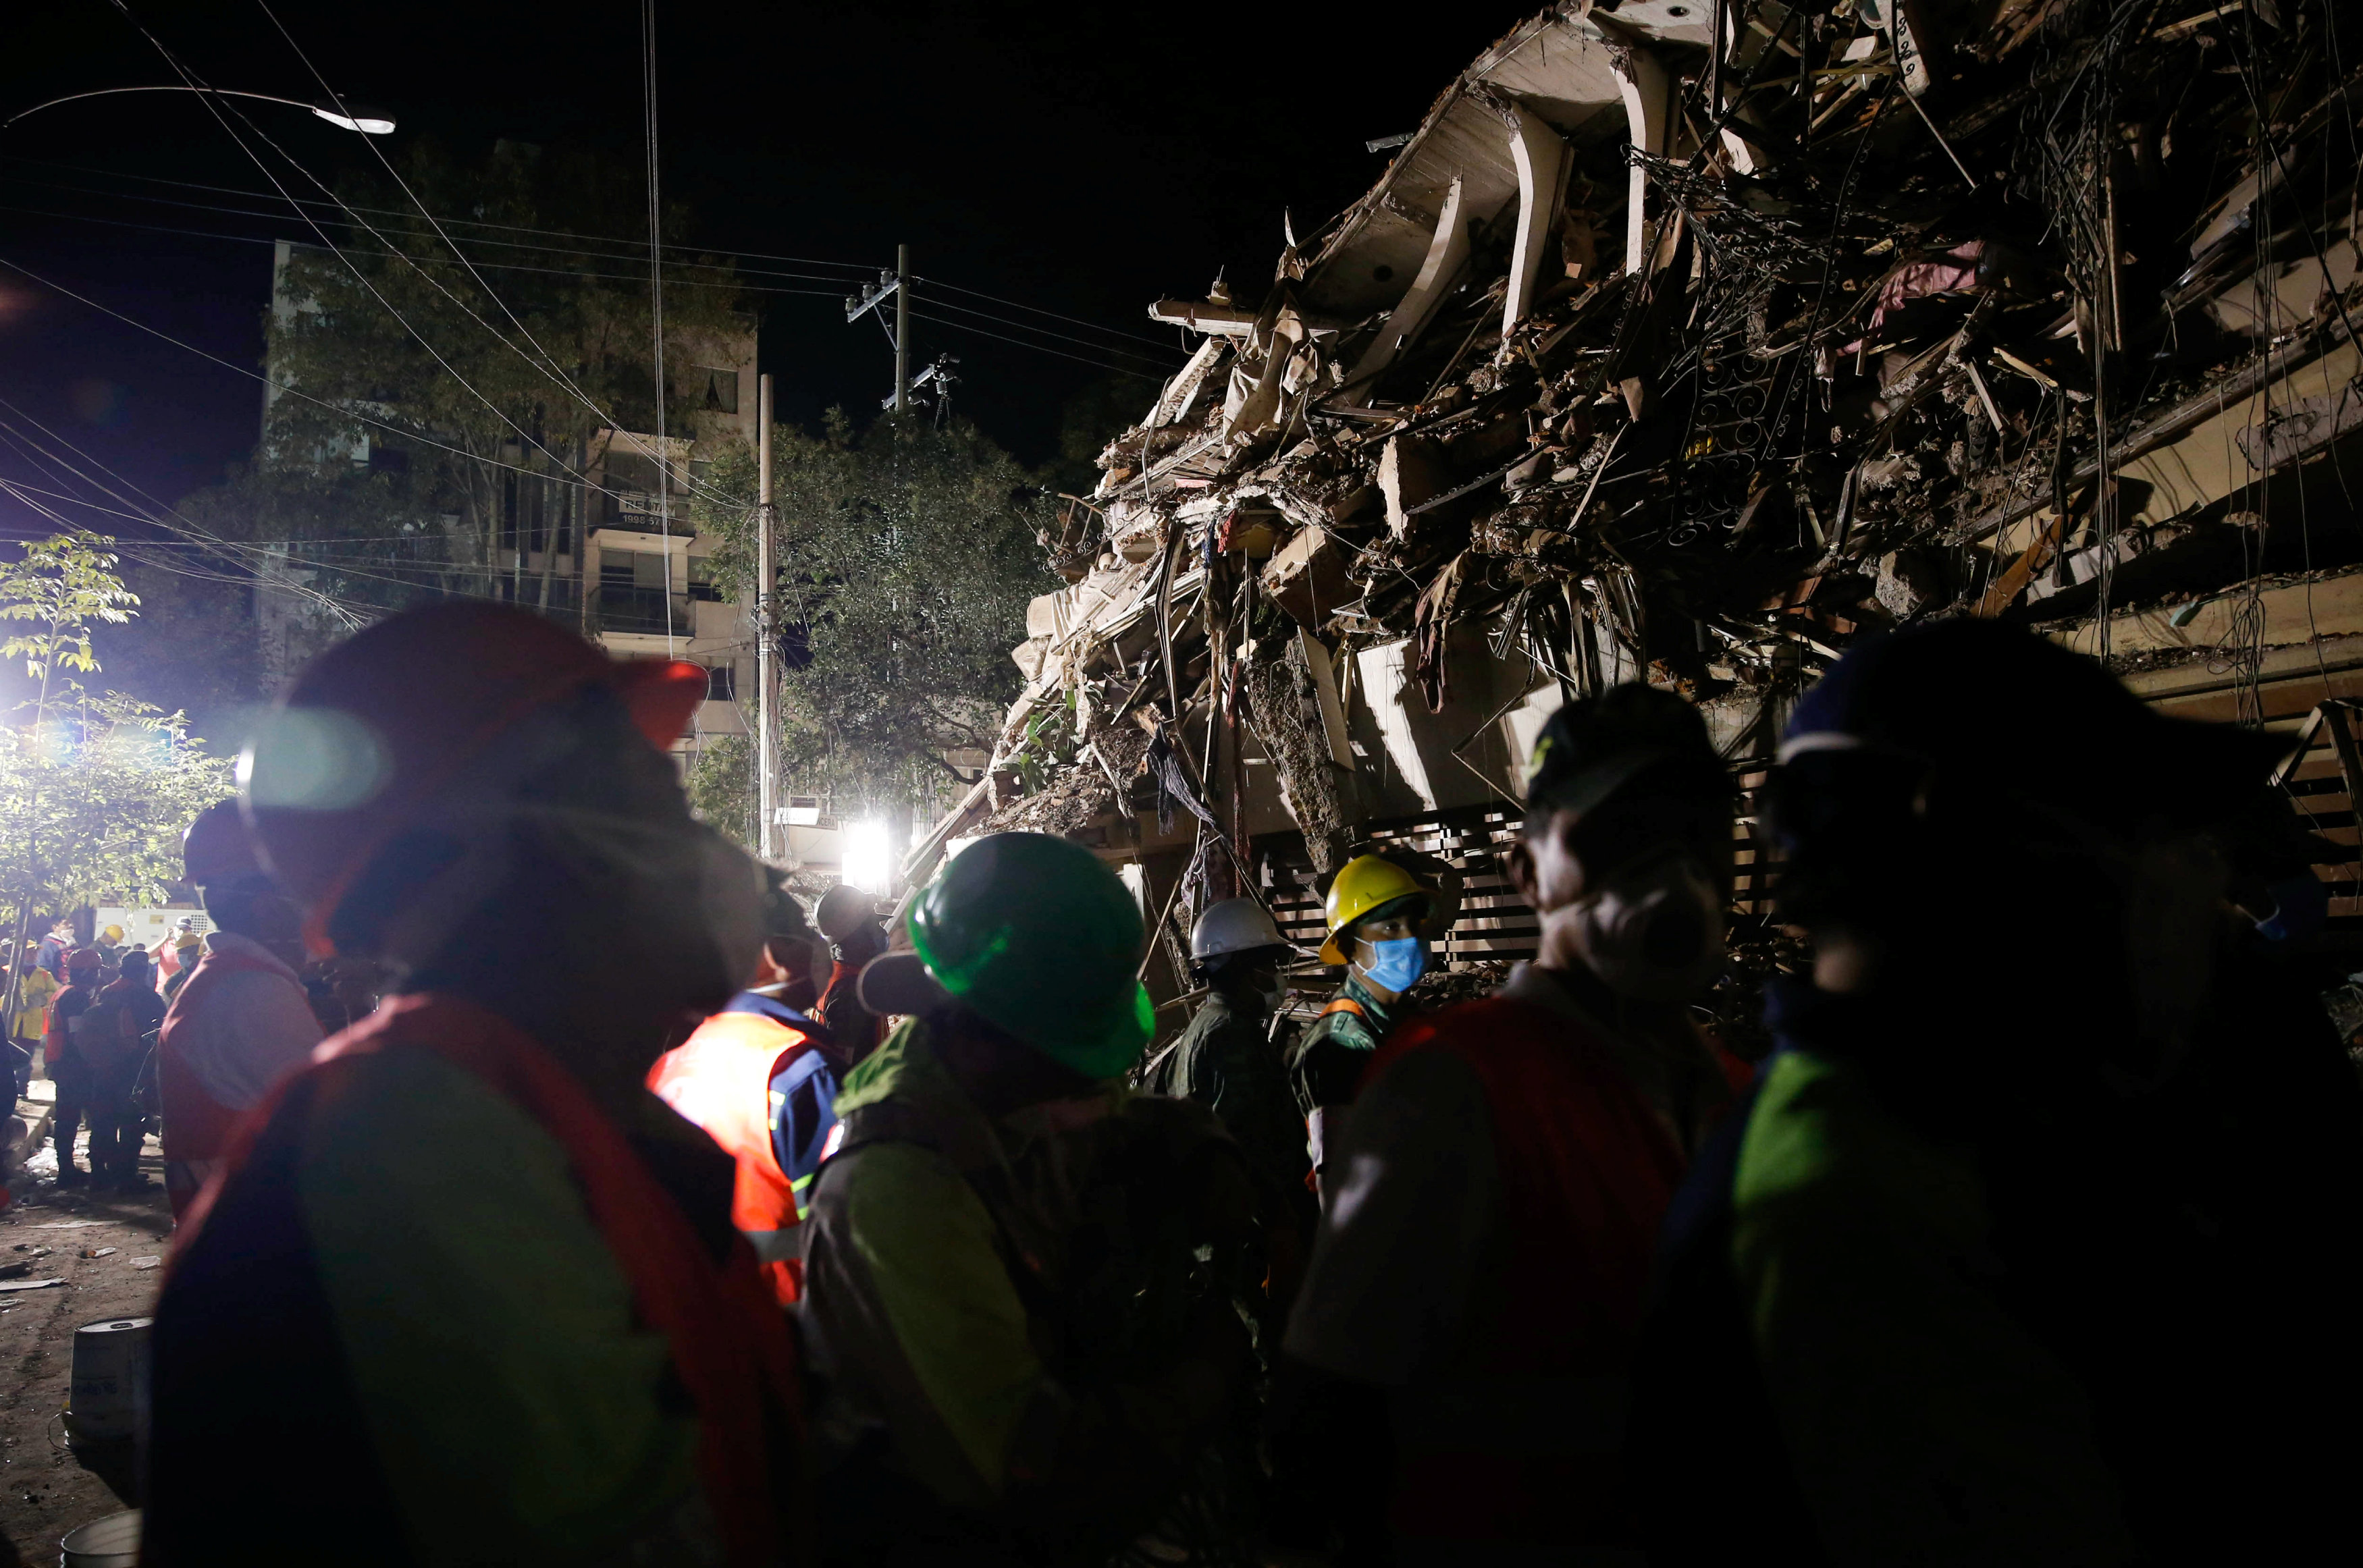 Rescuers work at the site of a collapsed building after an earthquake in Mexico City, Mexico September 20, 2017. REUTERS/Henry Romero